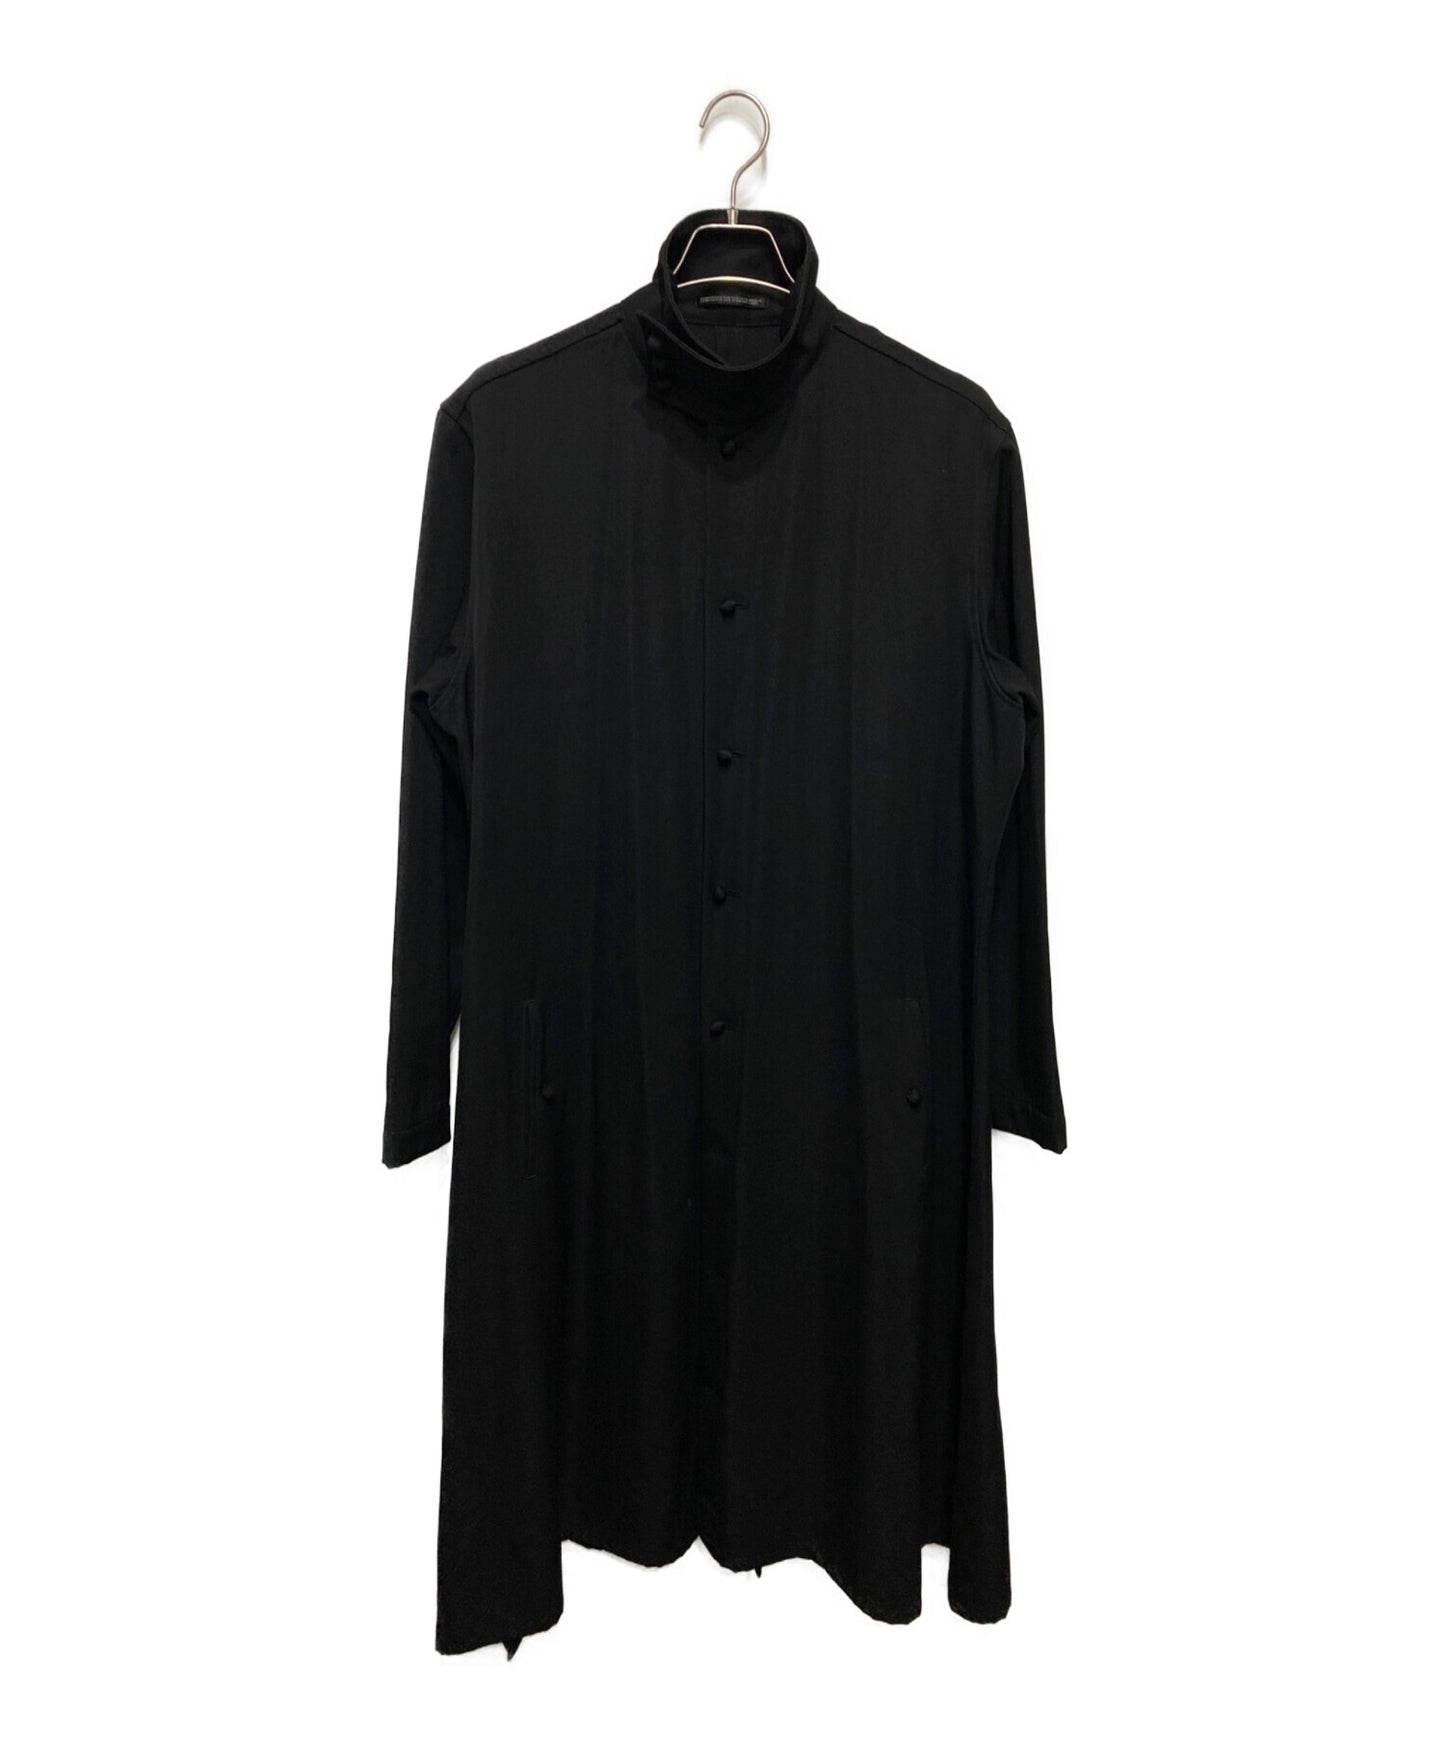 [Pre-owned] Yohji Yamamoto pour homme Stand collar long dress coat HV-D16-110